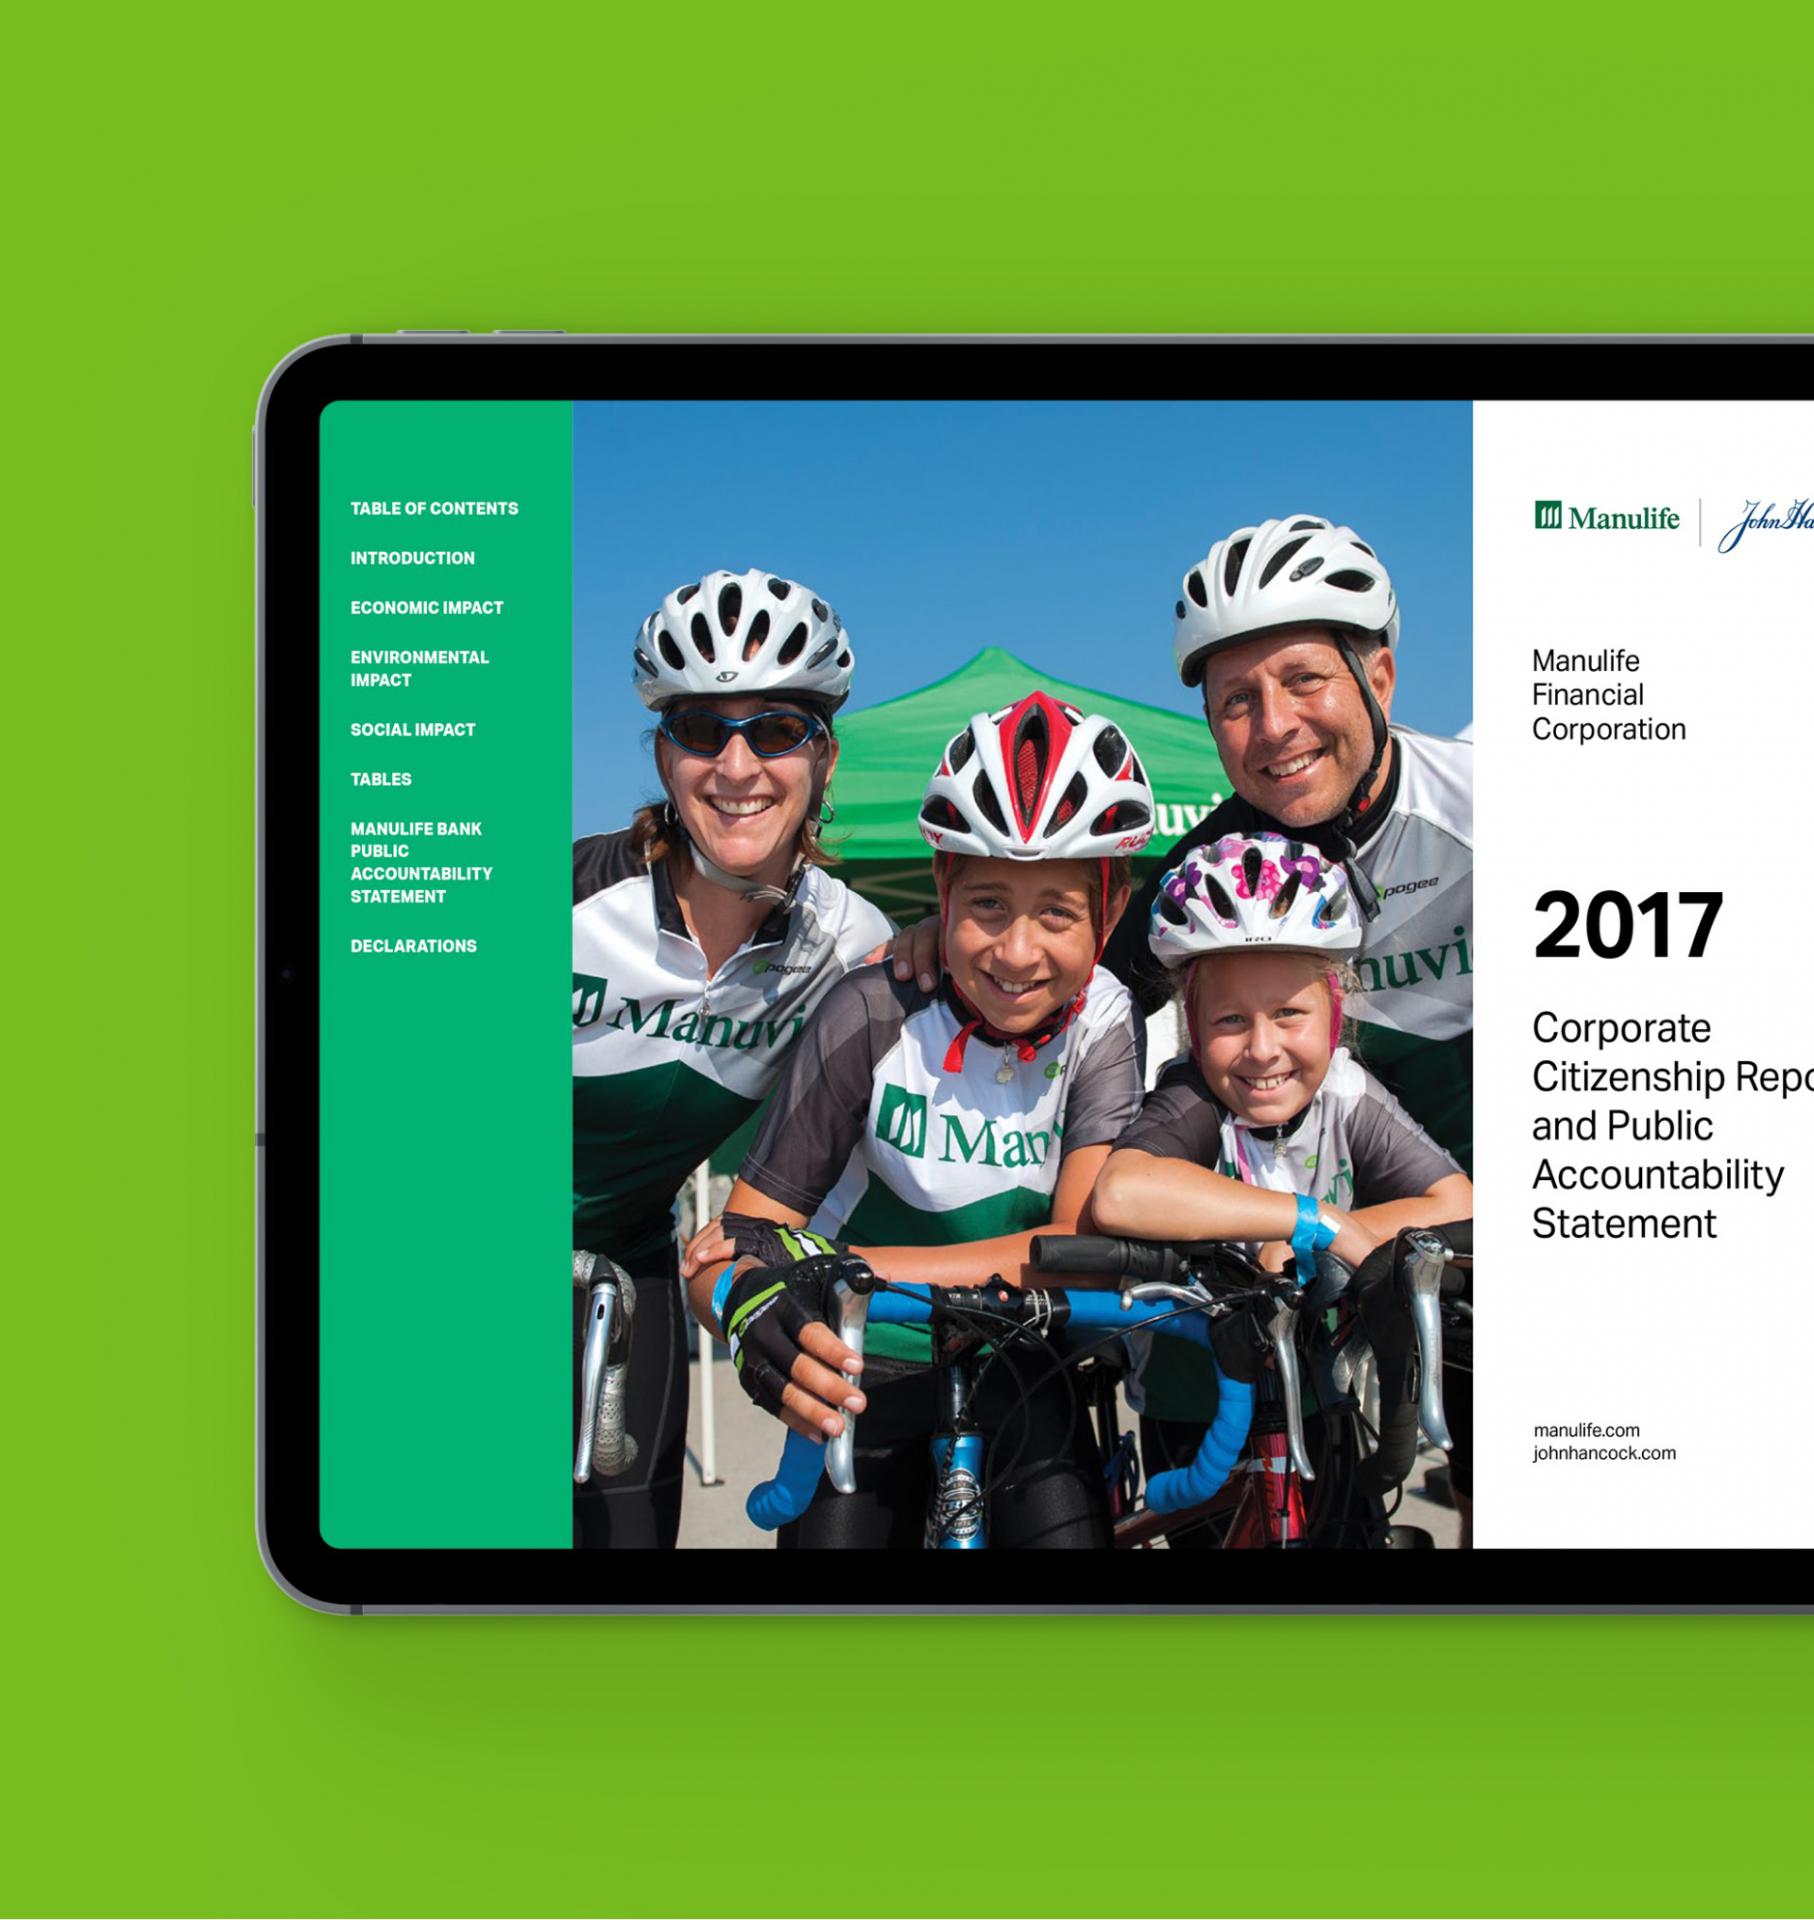 Manulife Sustainability Report and Public Accountability Statement